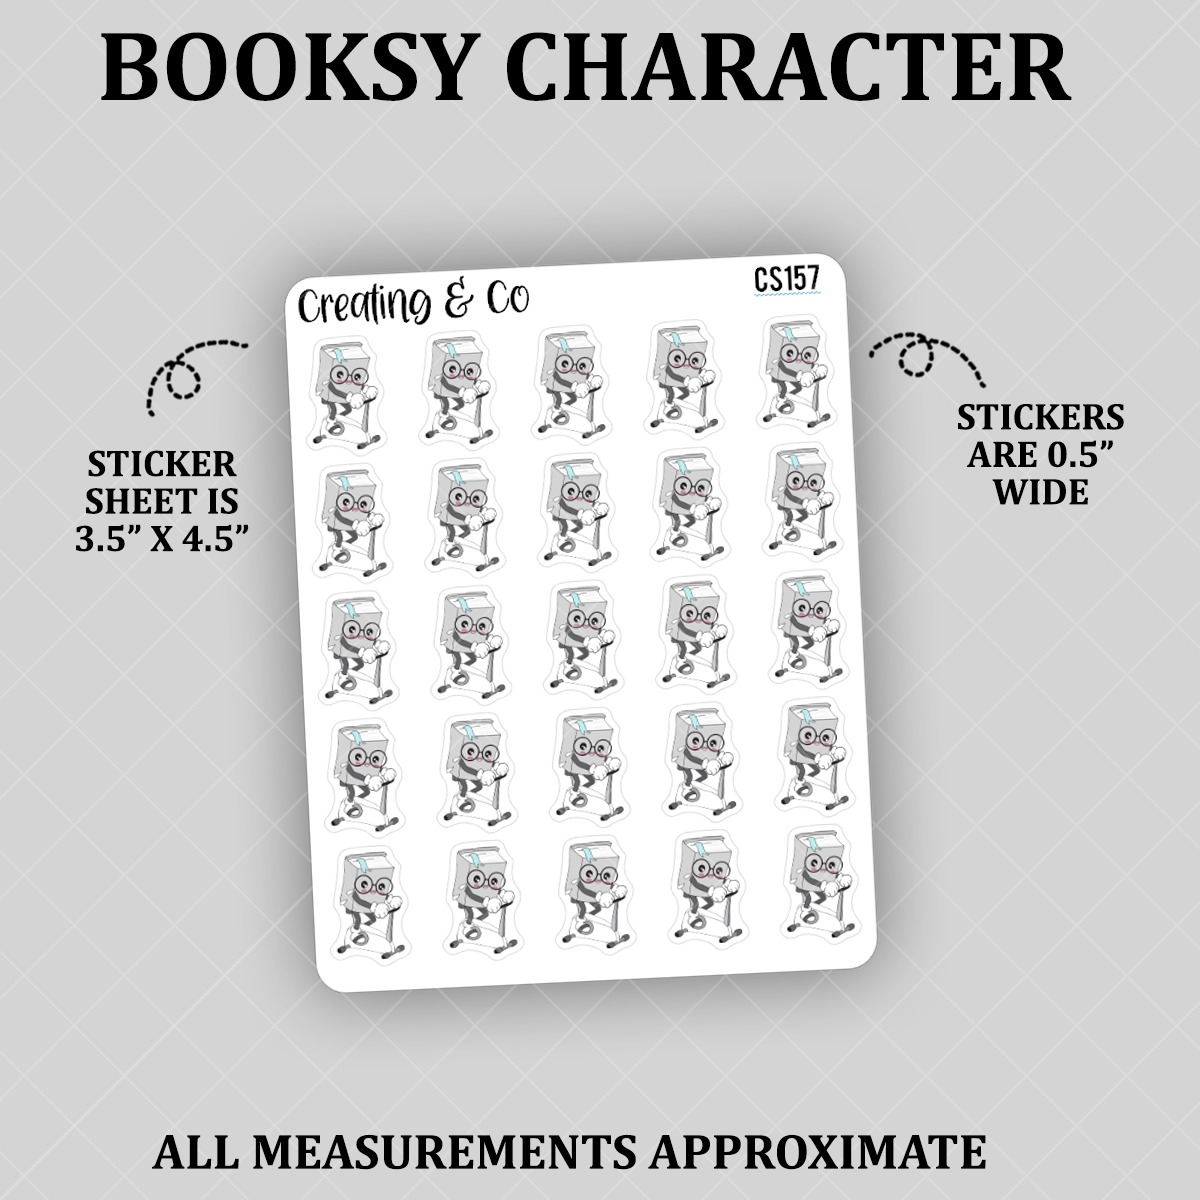 Stationary Bike Booksy, Spin Class Booksy Character Functional Stickers - CS157